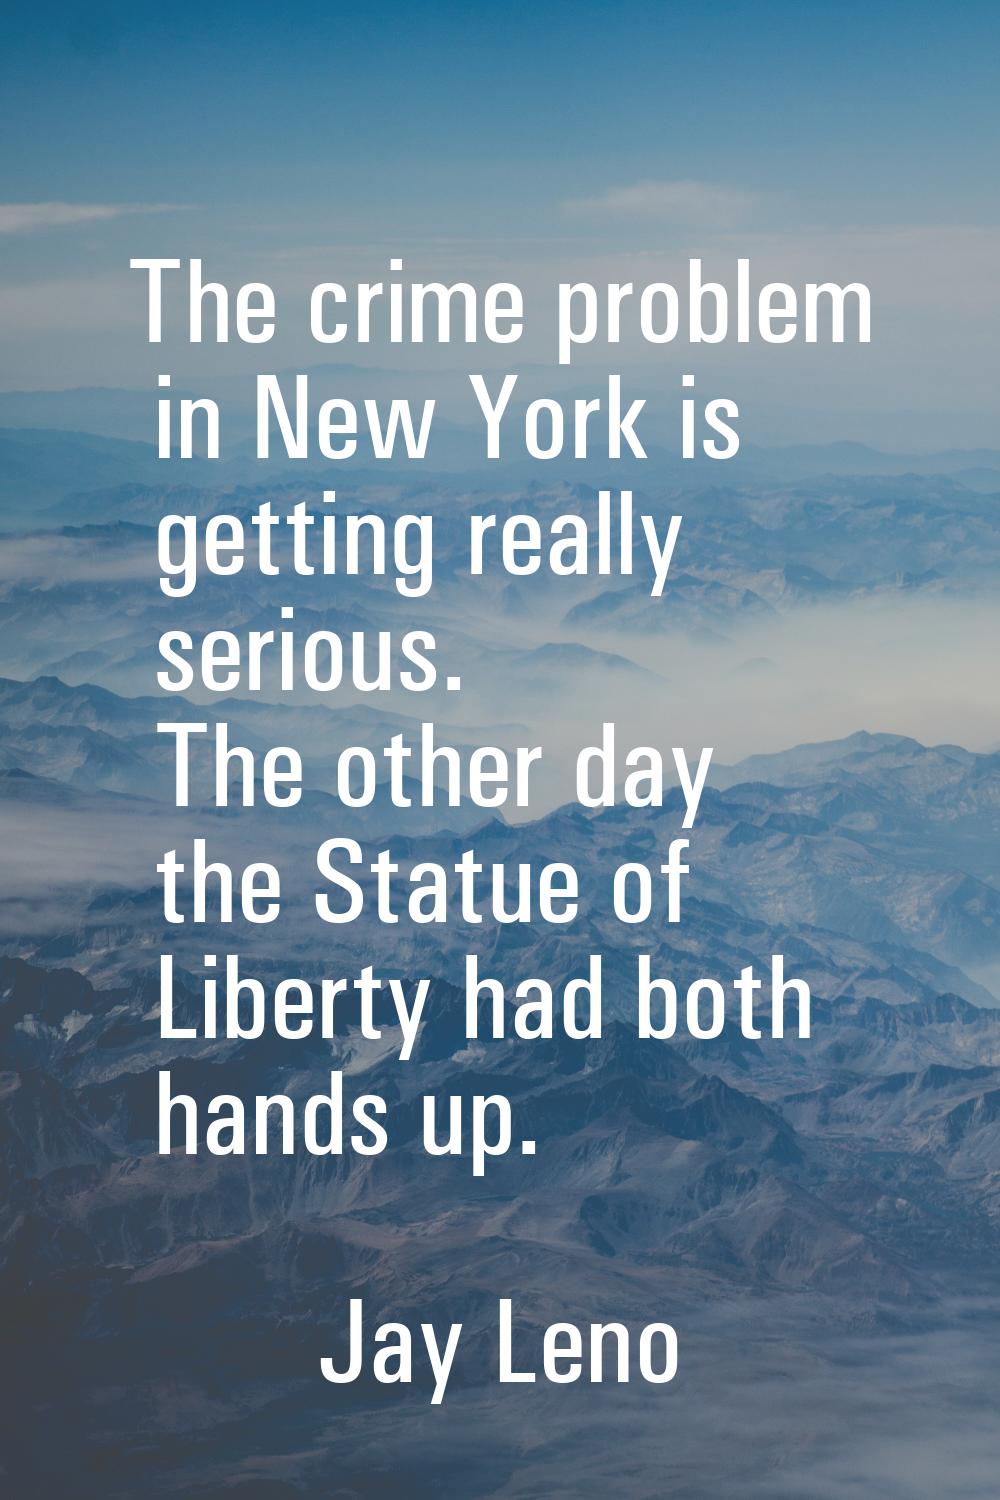 The crime problem in New York is getting really serious. The other day the Statue of Liberty had bo